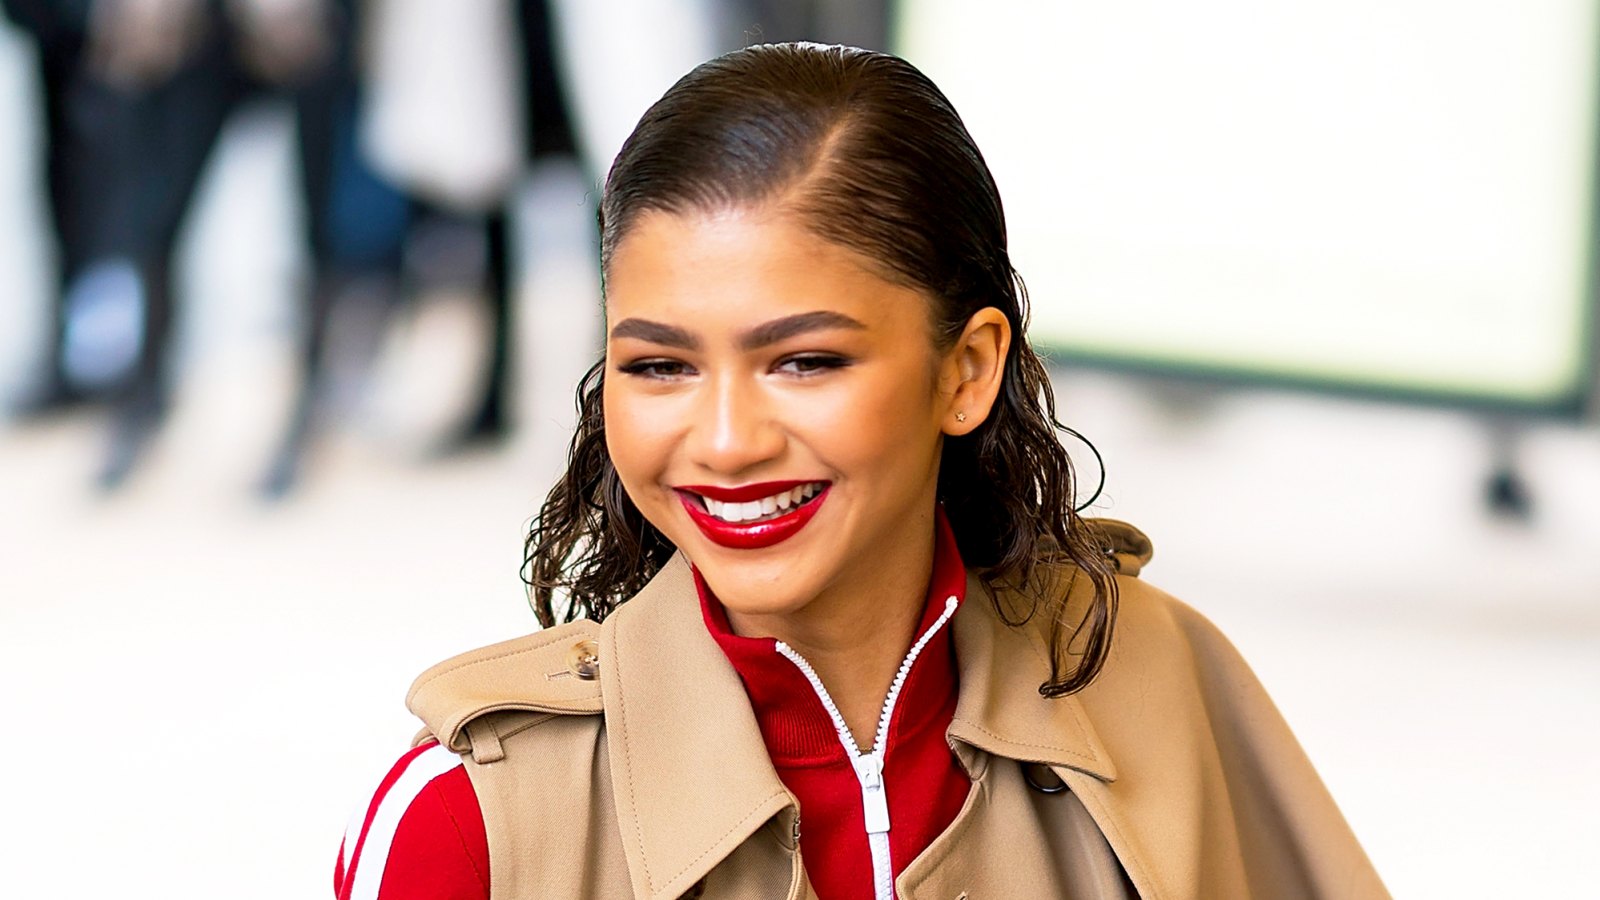 Zendaya attends the Michael Kors fashion show during New York 2018 Fashion Week at the Vivian Beaumont Theater at Lincoln Center in New York City.